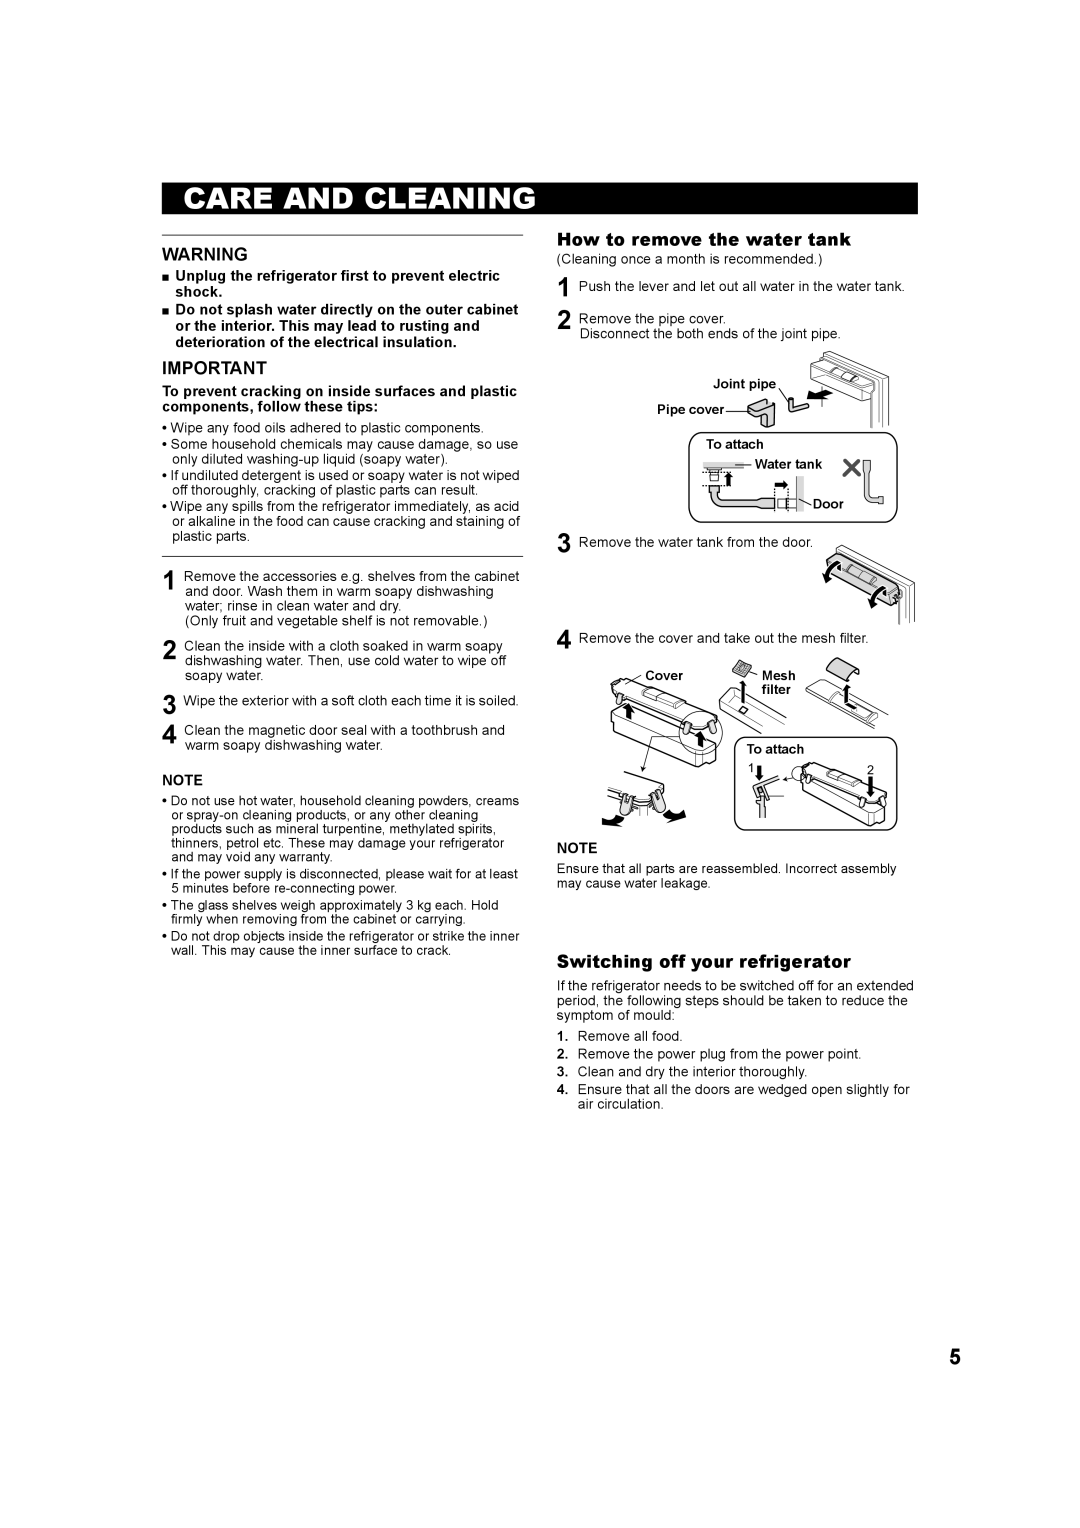 Sharp SJ-TD555S operation manual Care And Cleaning, How to remove the water tank, Switching off your refrigerator 